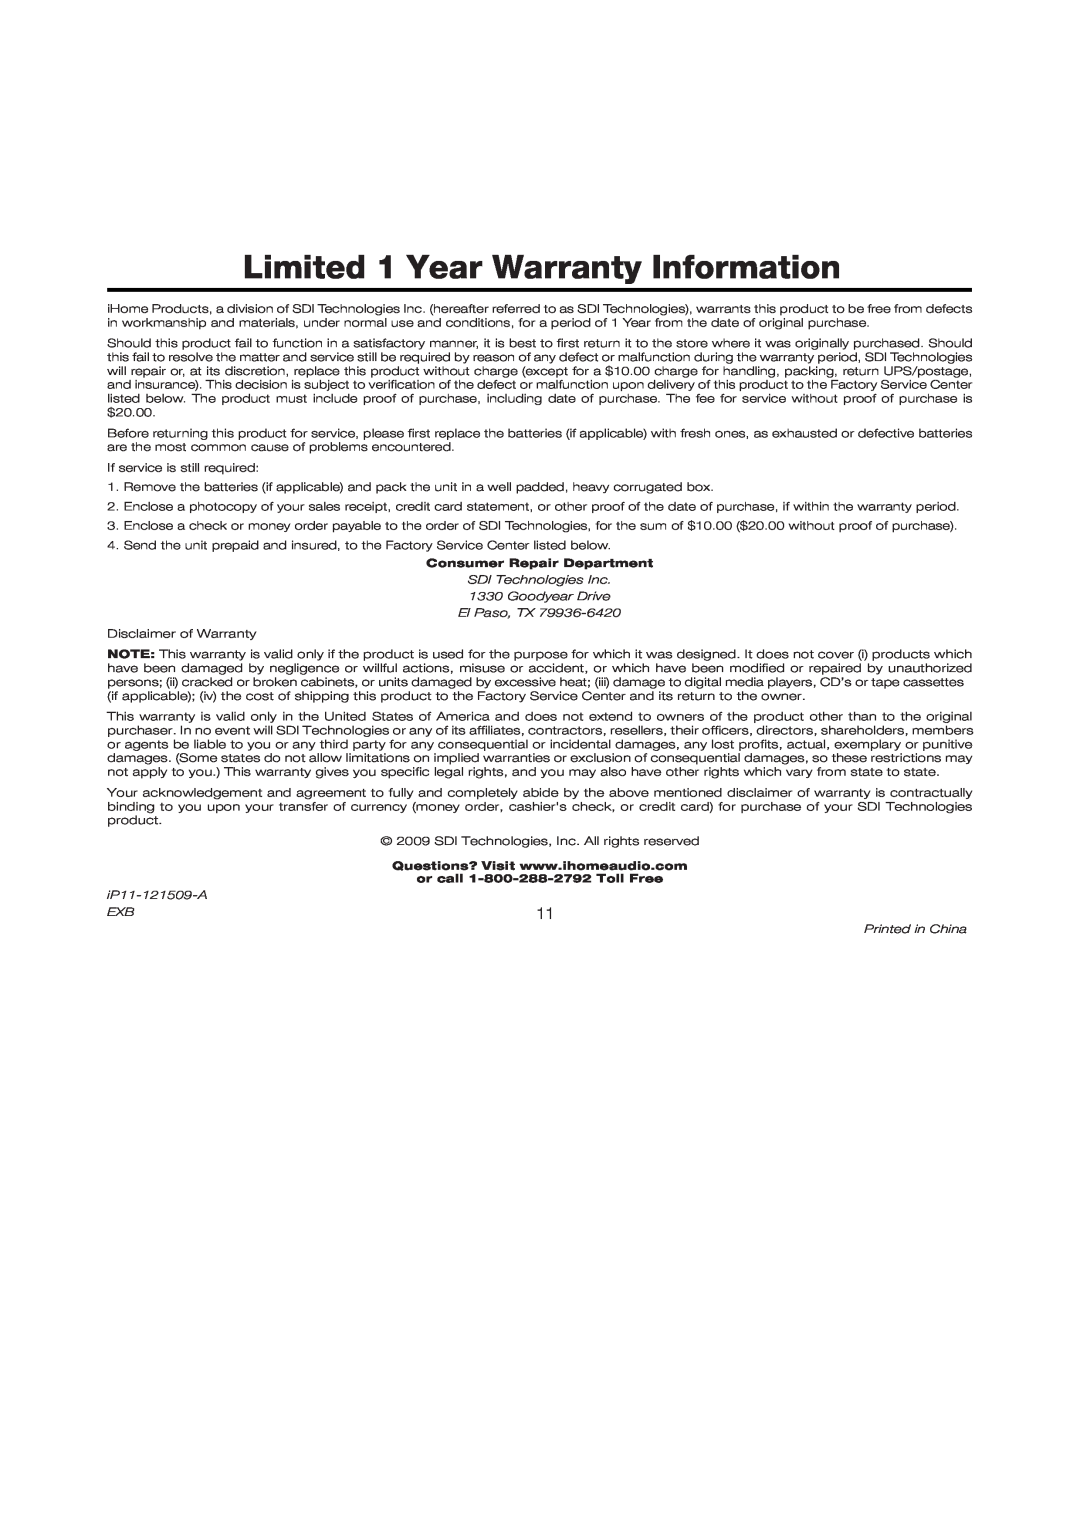 iHome iP11 manual Limited 1 Year Warranty Information, Consumer Repair Department, or call 1-800-288-2792 Toll Free 